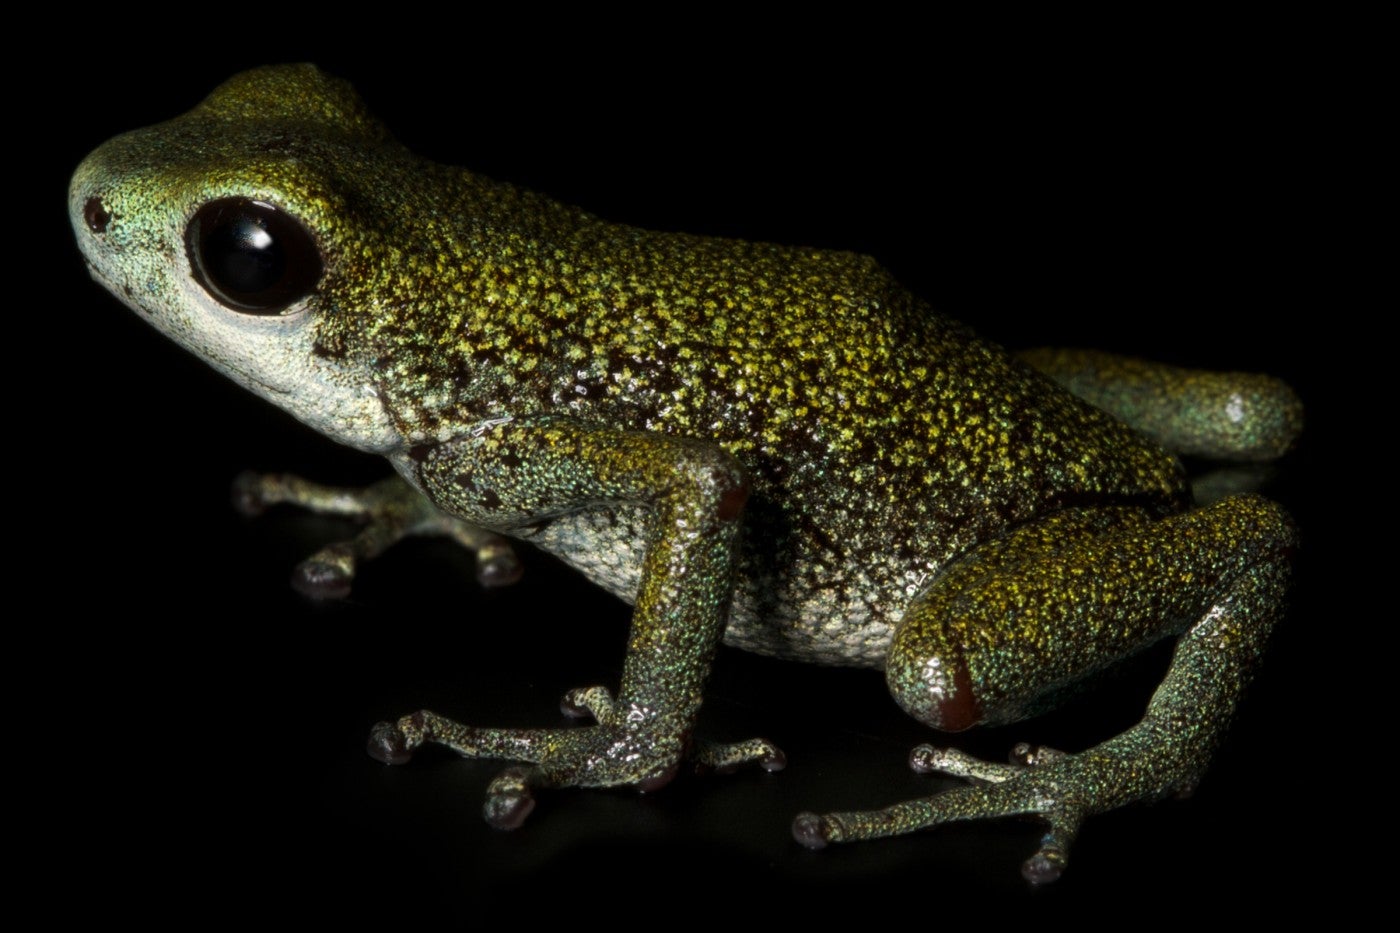 Vicente's poison frog on a black background